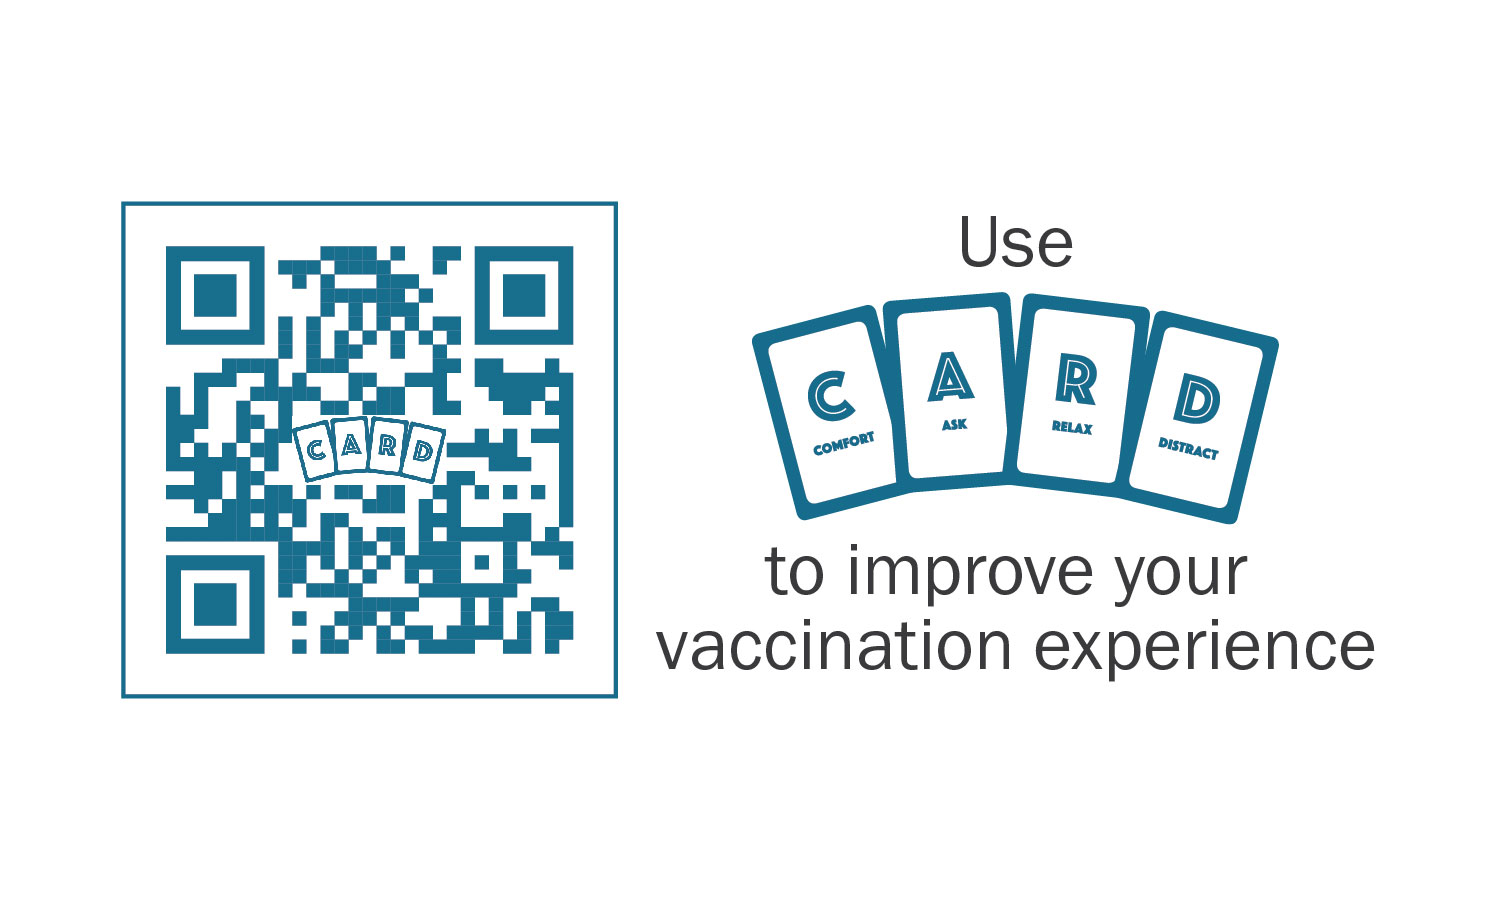 Use CARD to improve your vaccination experience: QR code